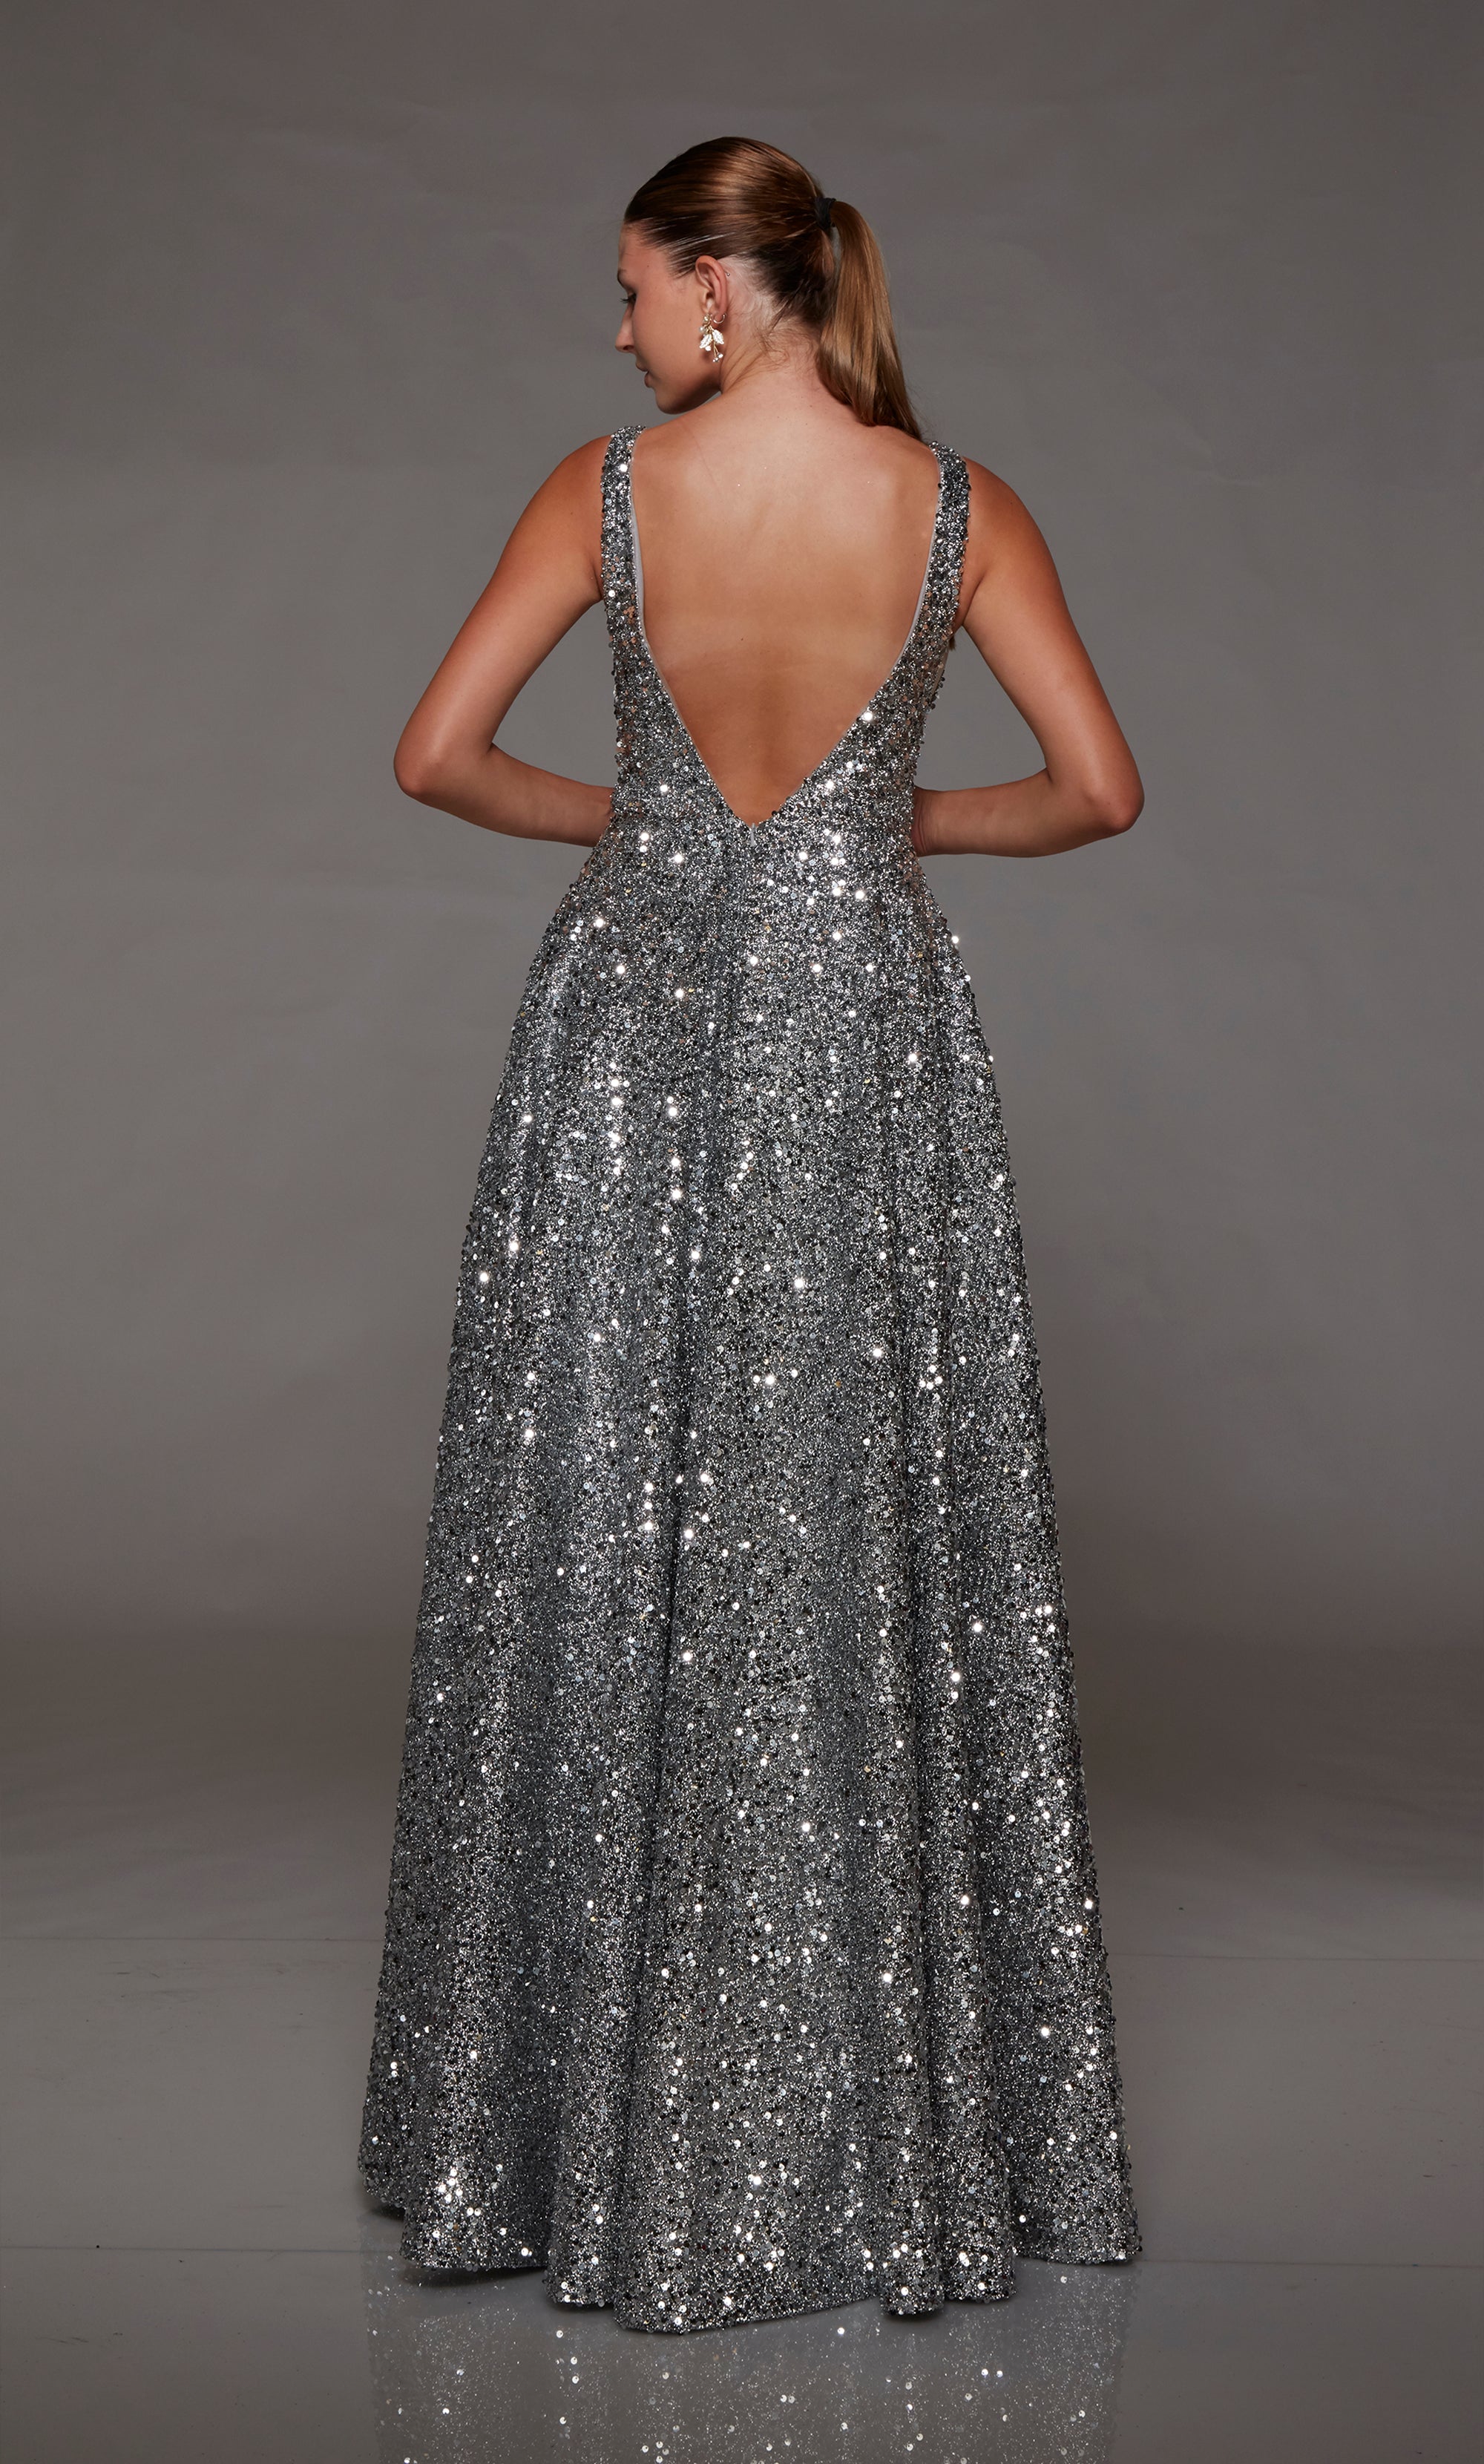 Silver prom dress: A-line silhouette, plunging neckline, front slit, and an chic V-shaped back for an stylish and glam look. Designed by ALYCE Paris.